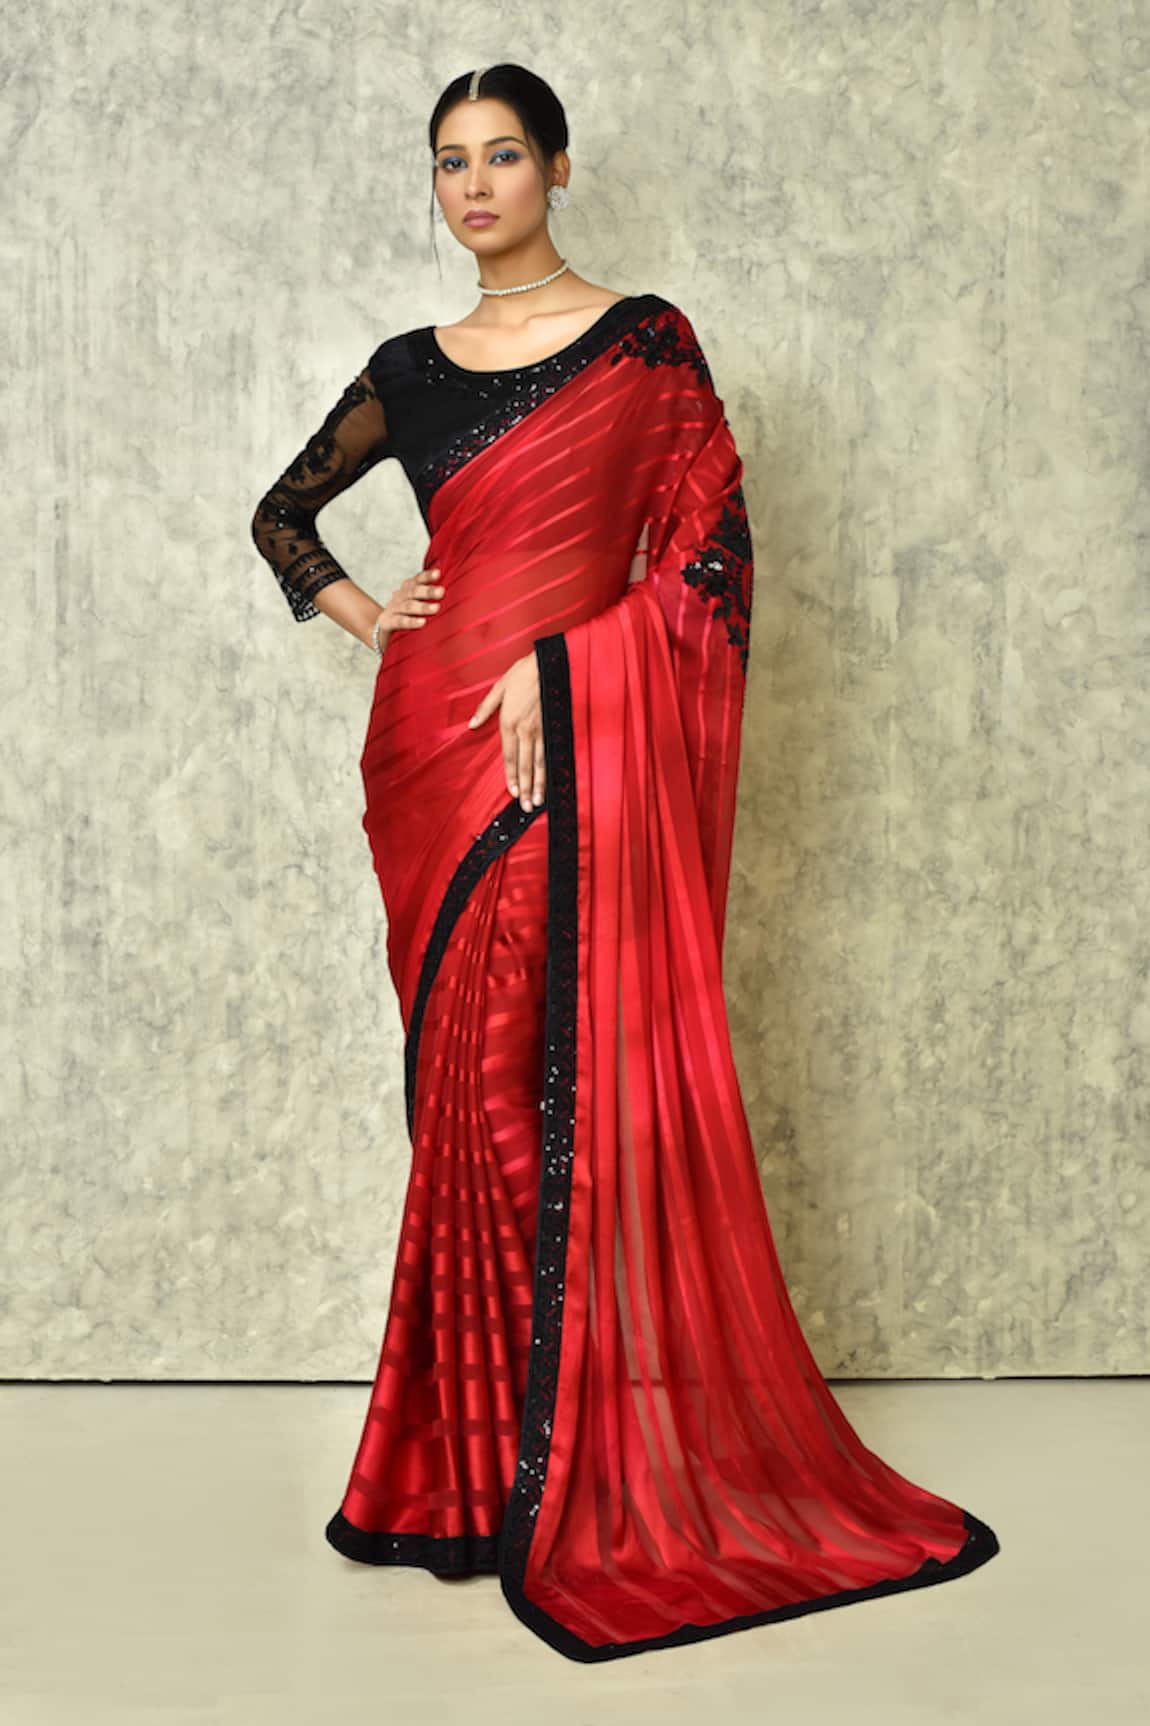 Samyukta Singhania Floral Embroidered Striped Saree With Blouse